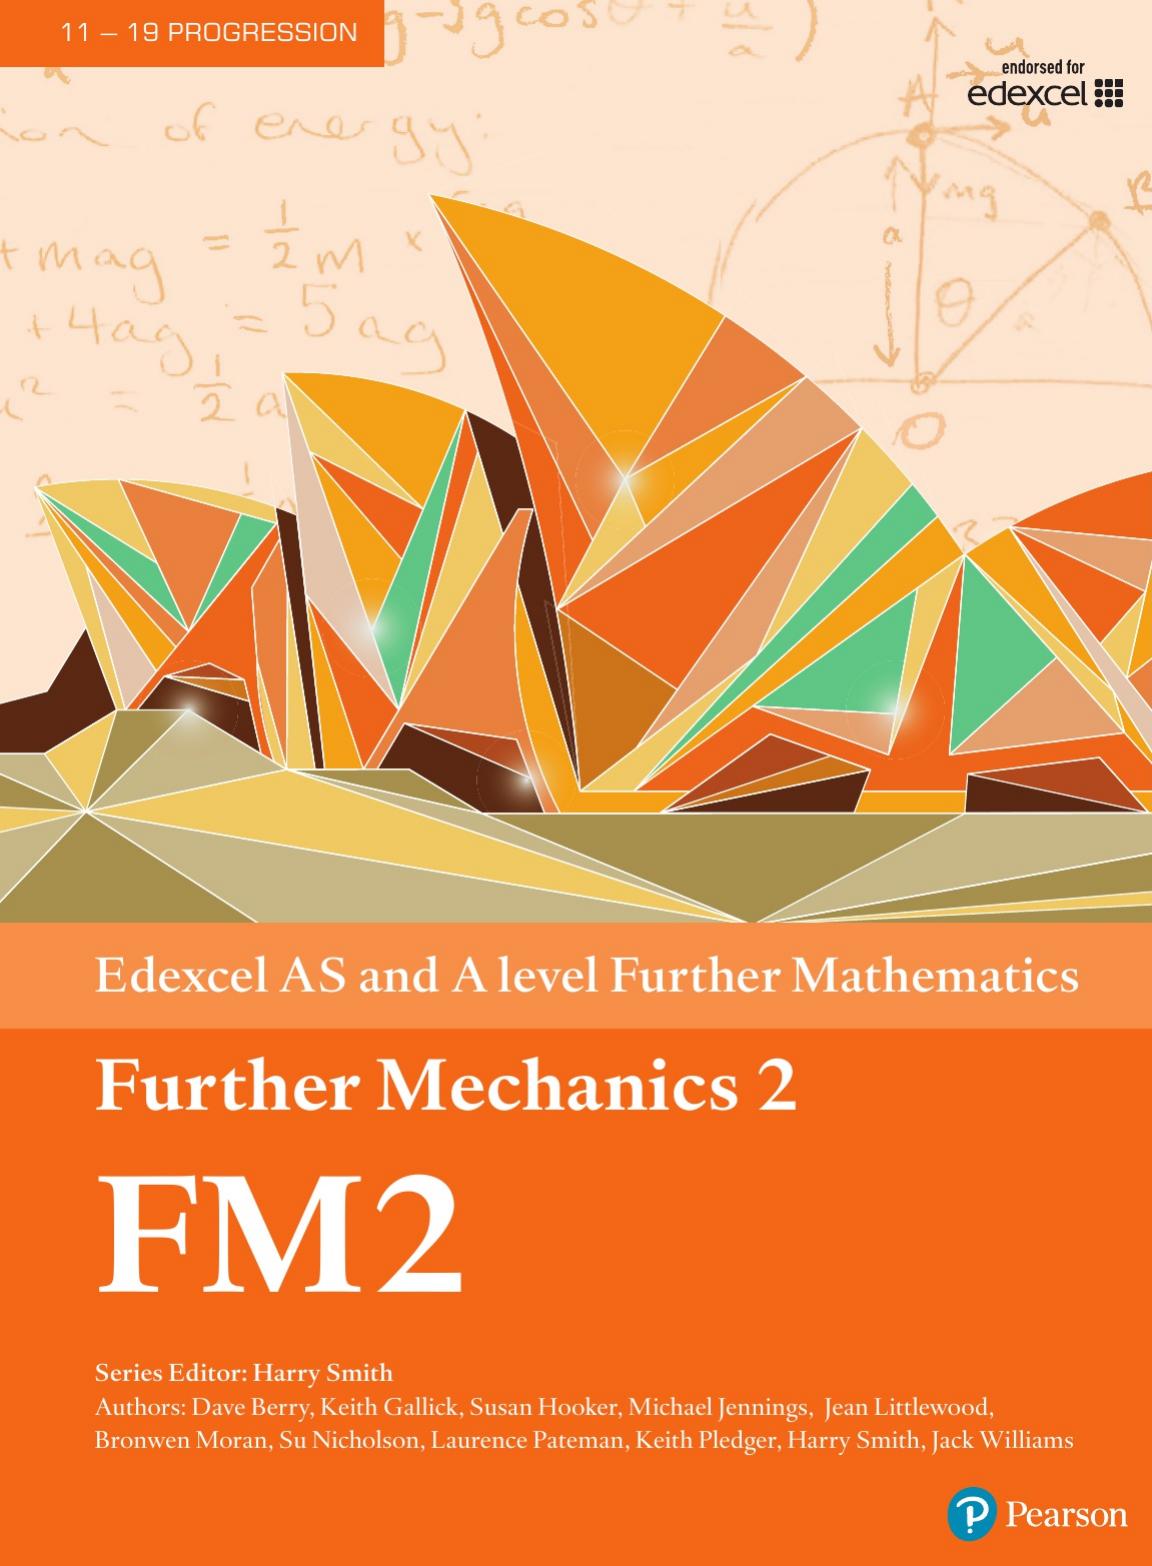 Edexcel AS and A level Further Mathematics Further Mechanics 2 by coll.